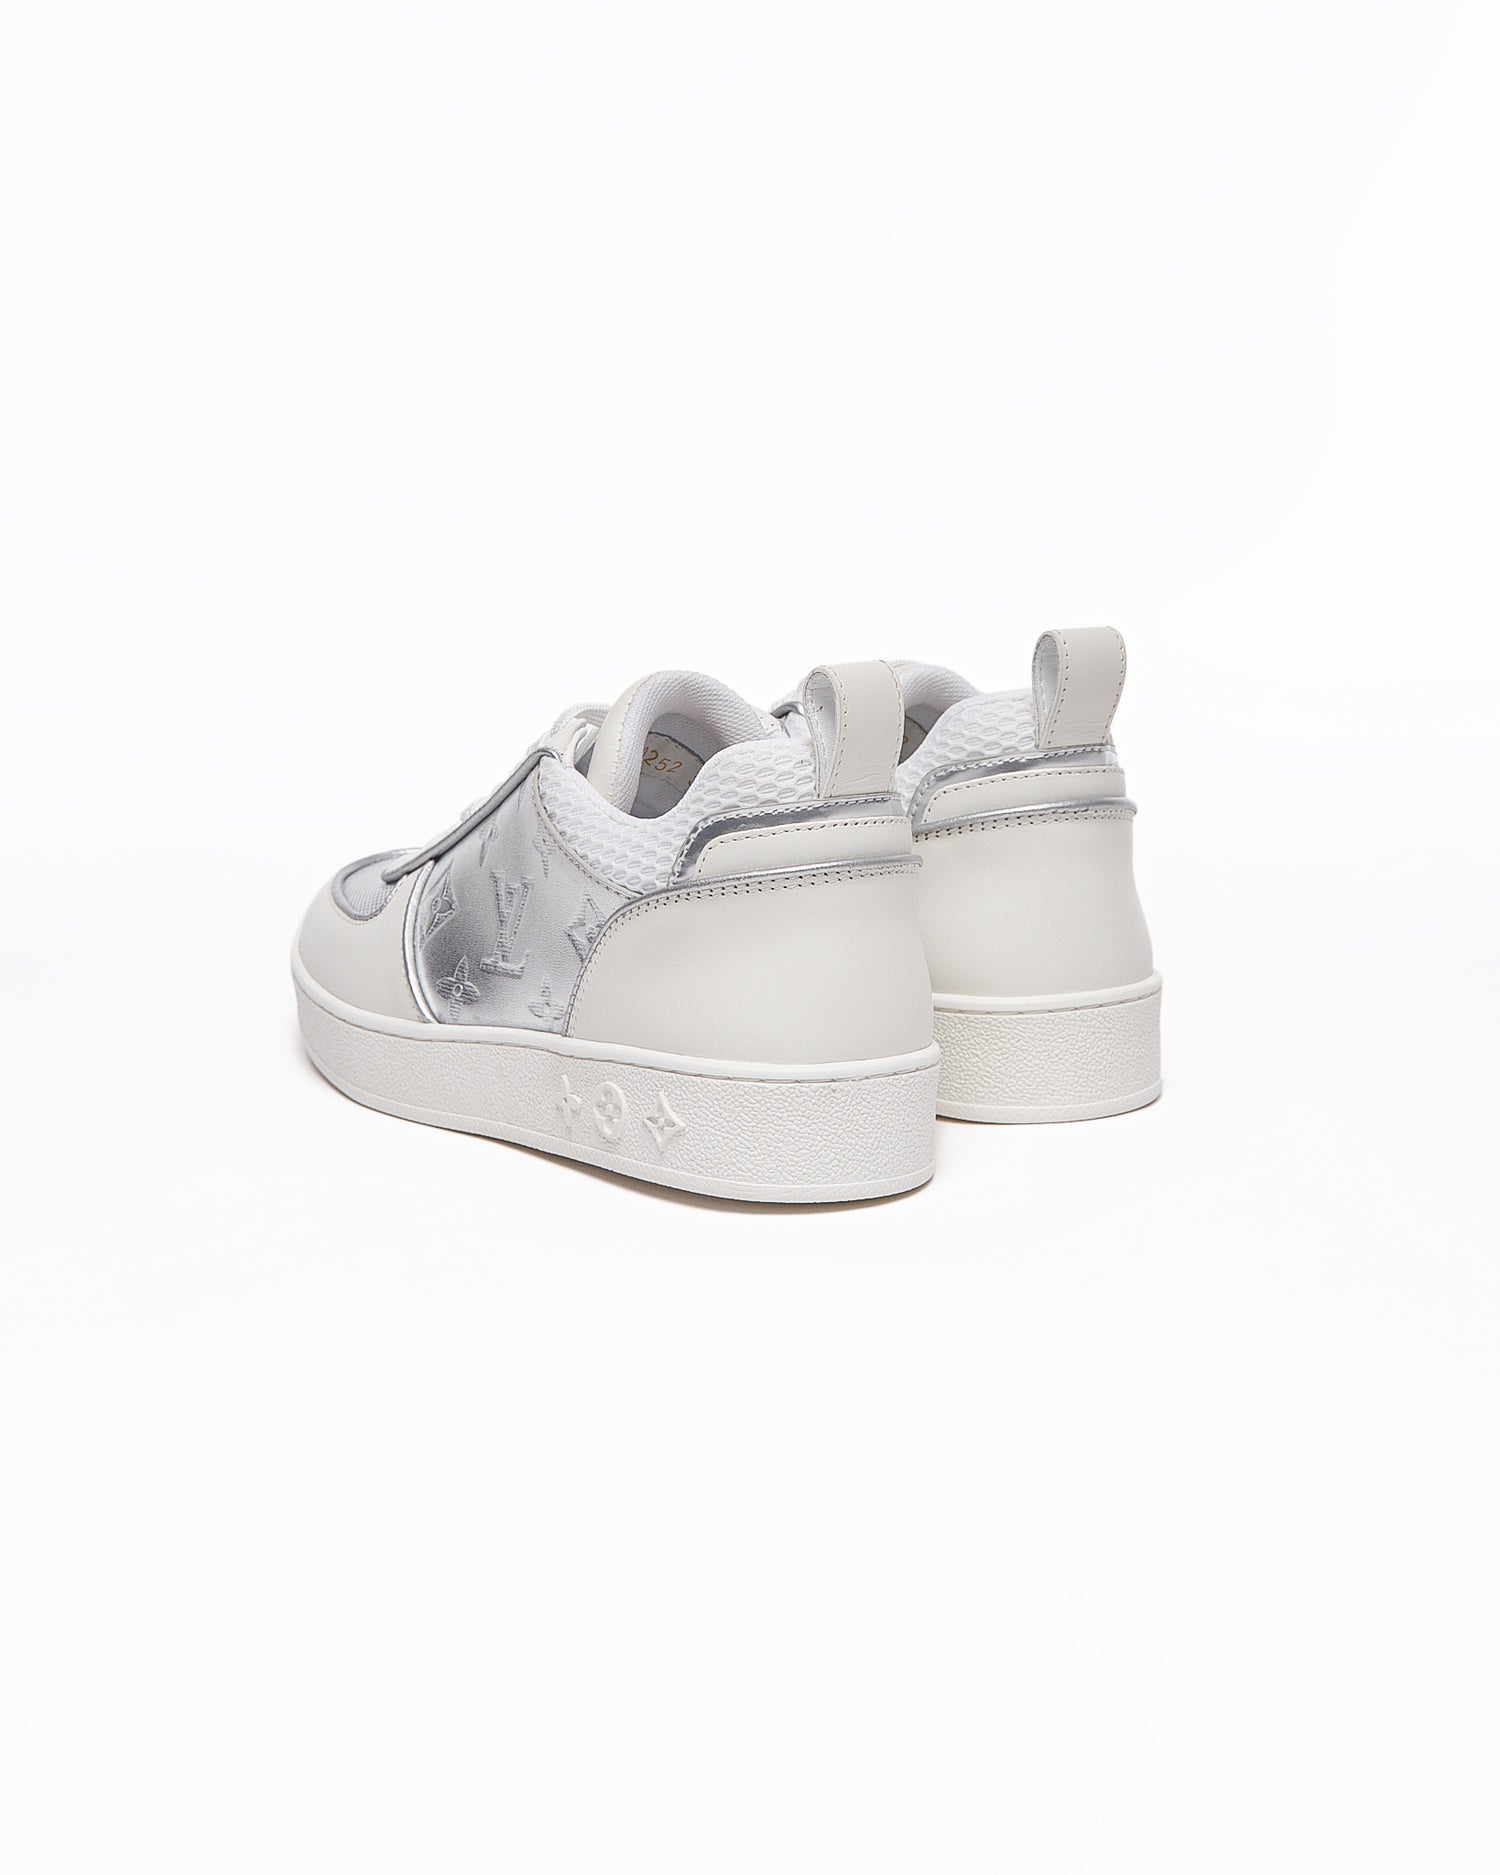 LV Monogram Silver Trainers Shoes 145.90